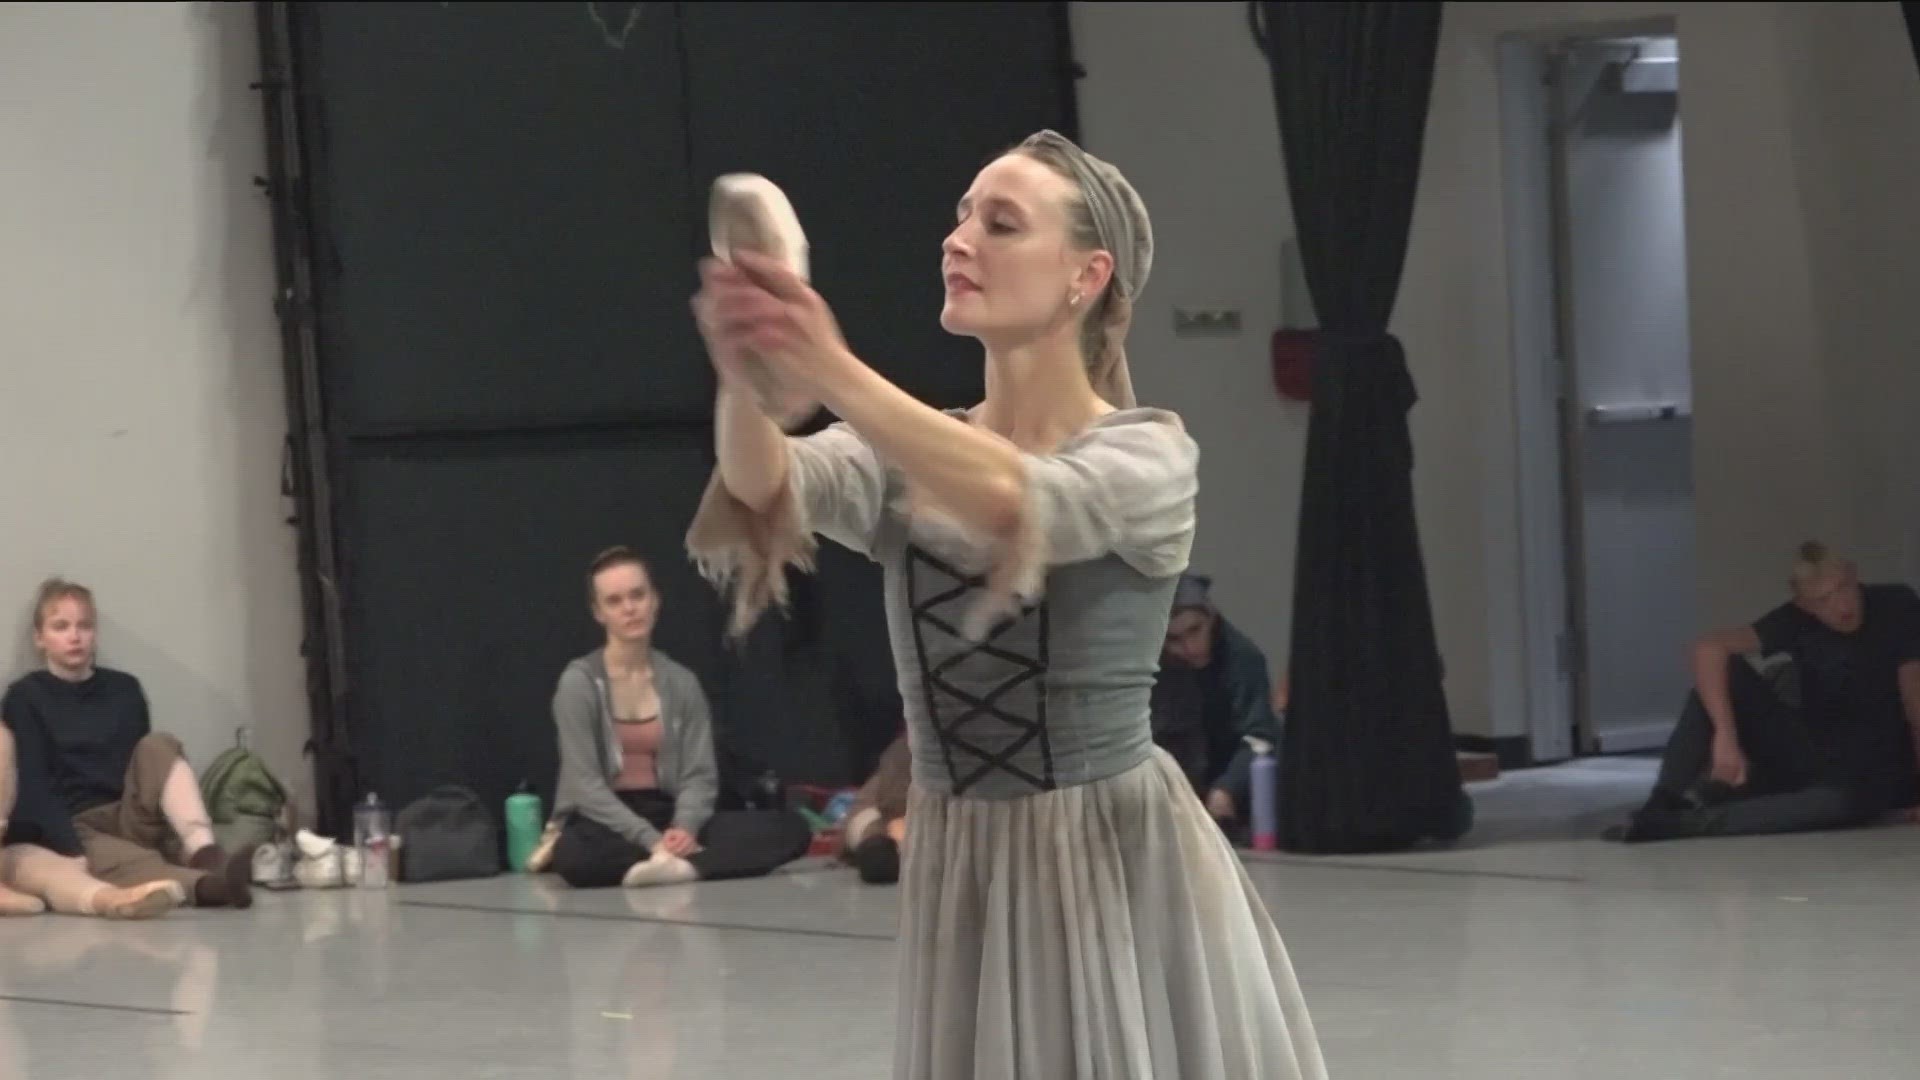 Ballet Austin is gearing up for their final show of the season, "Cinderella."